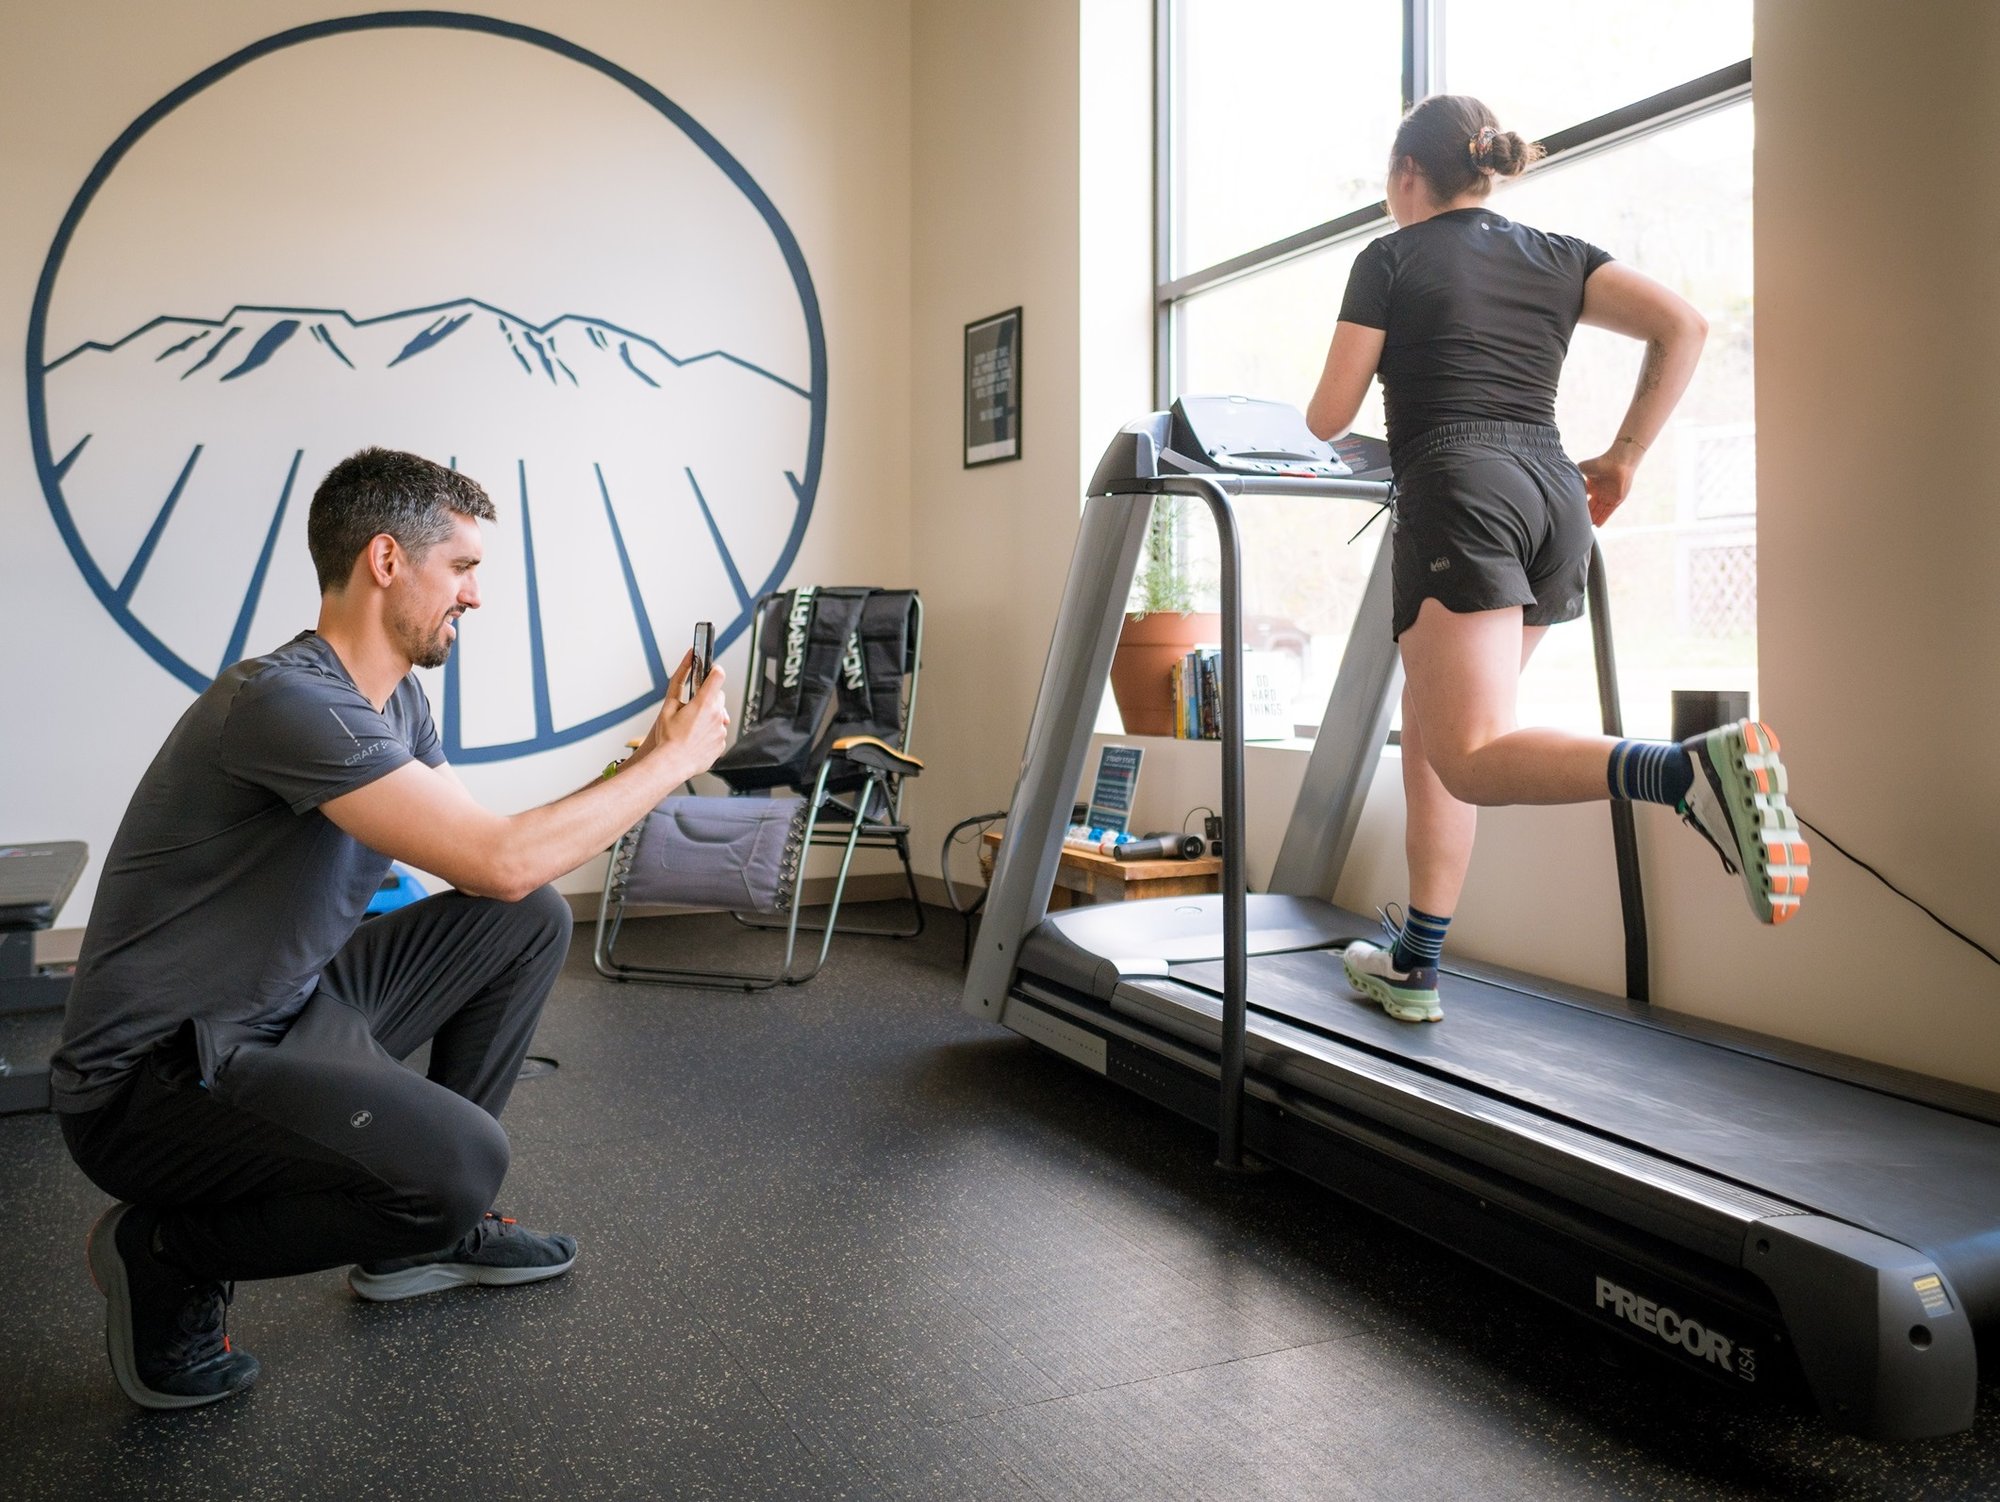 A Portland Maine Running Physical Therapist performs a gait analysis for a runner on a treadmill.